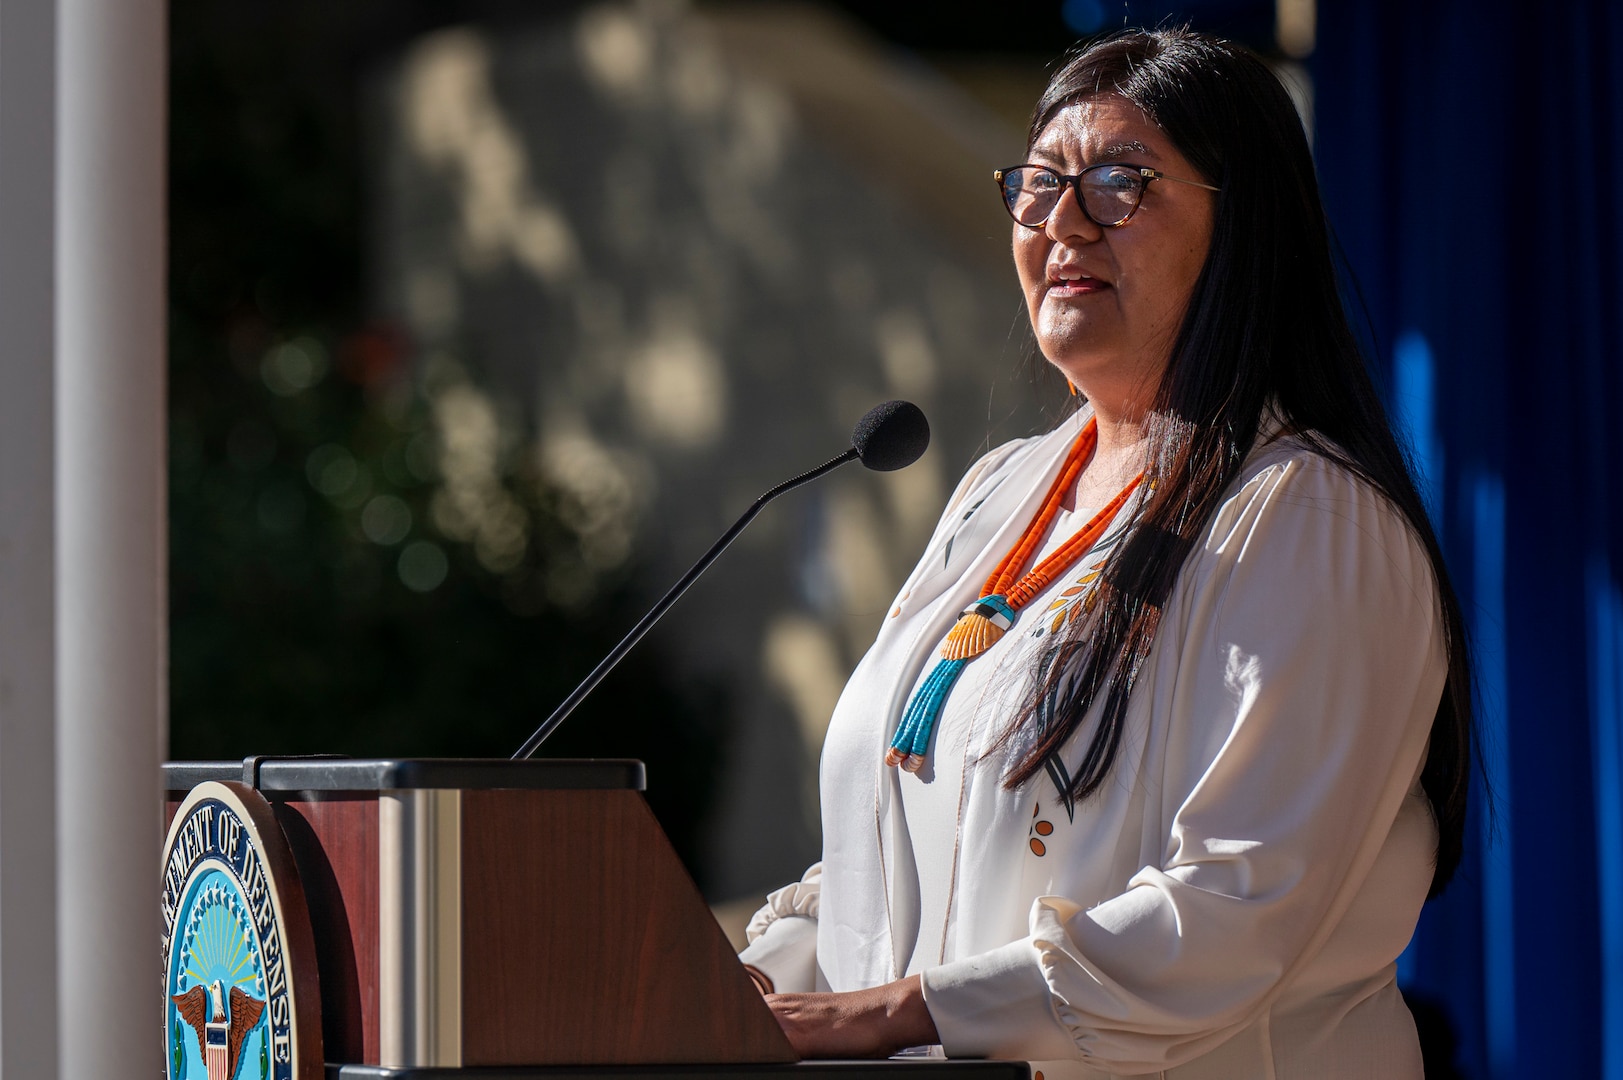 A civilian wearing a shell necklace speaks at a lectern outdoors.